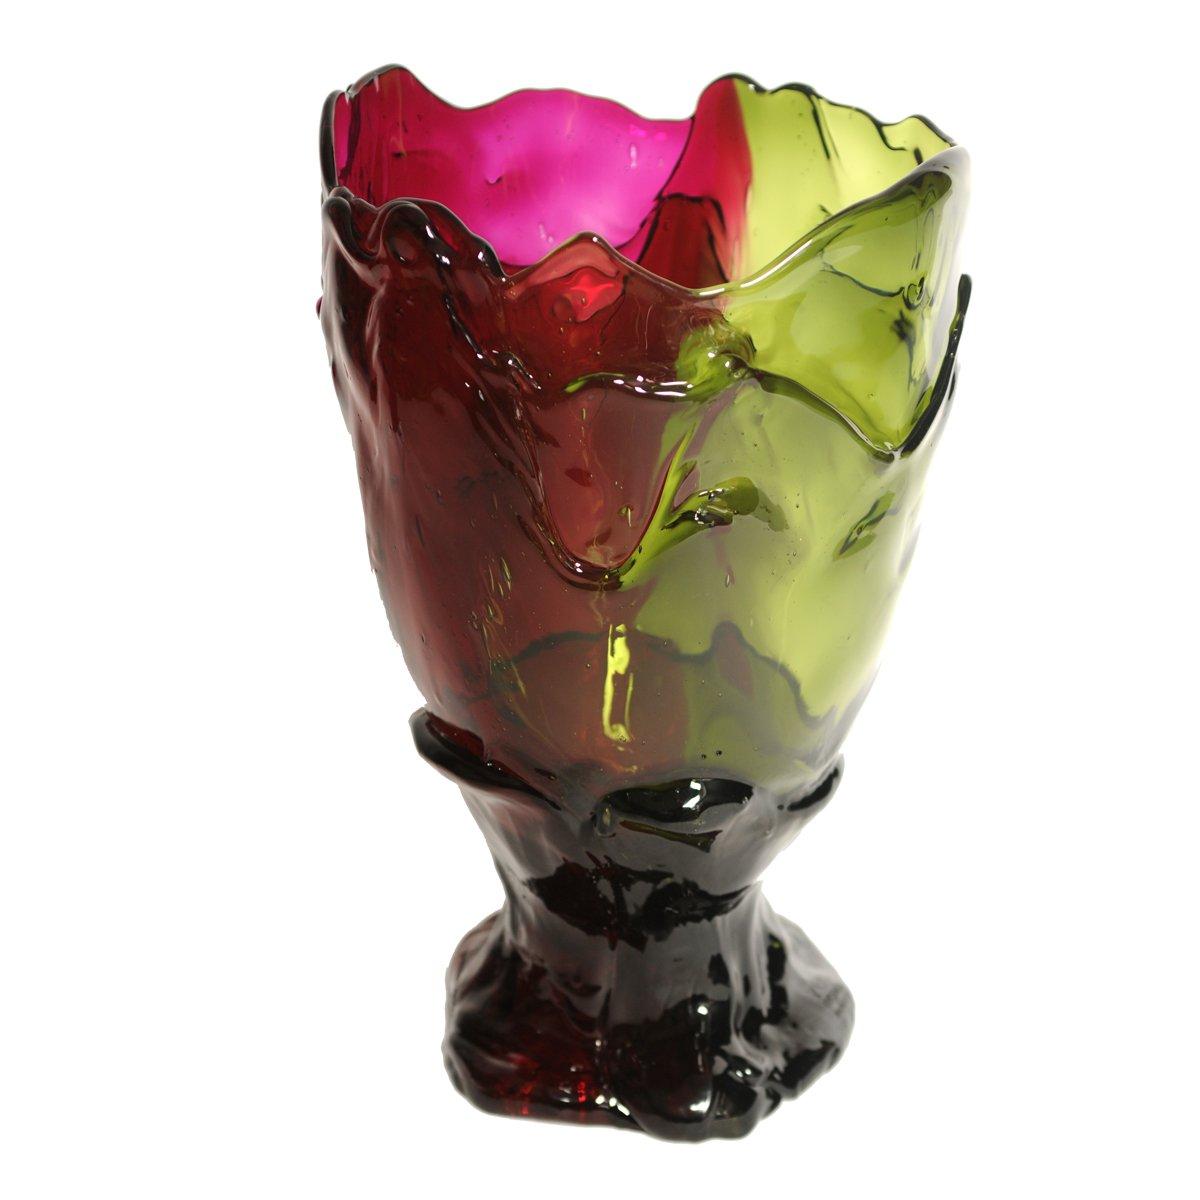 Twin-C vase, clear bottle green, clear fuchsia.

Vase in soft resin designed by Gaetano Pesce in 1995 for Fish Design collection.

Measures: L - ø 22cm x H 36cm

Other sizes available.

Colours: clear bottle green, clear fuchsia

Vase in